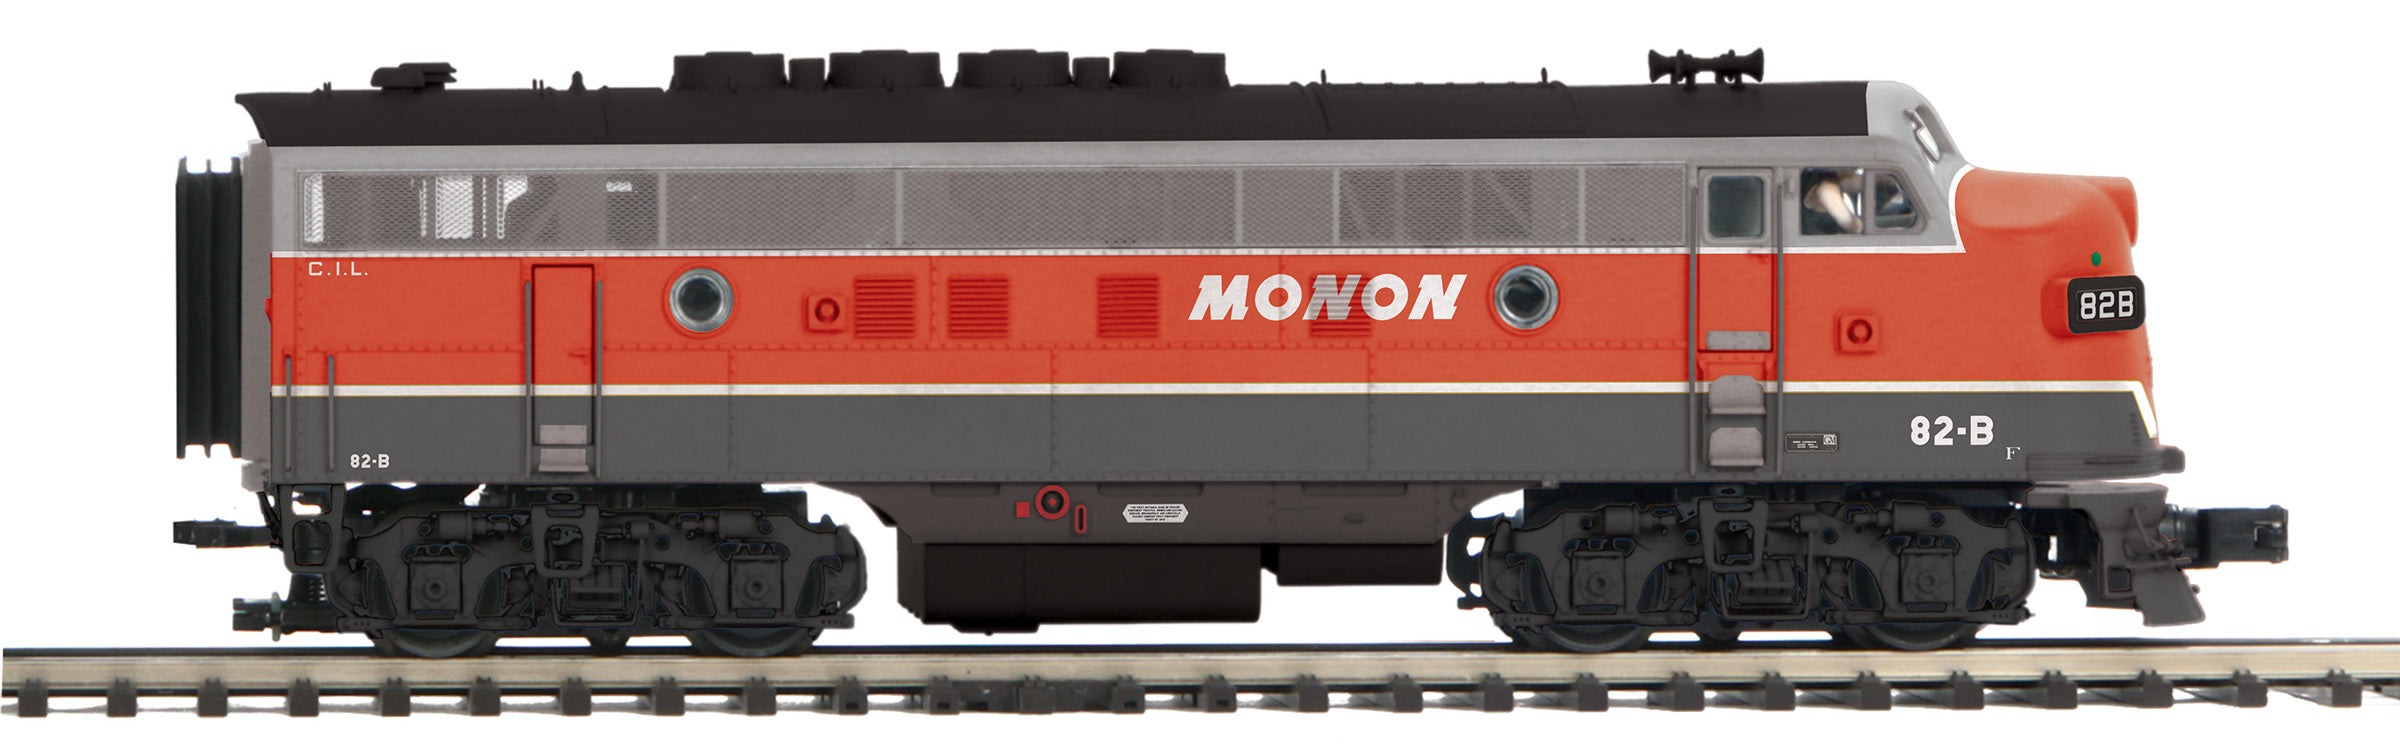 MTH 20-21588-1 - F3 A Unit Diesel Engine "Chicago, Indianapolis & Louisville - The Monon" #82B - Custom Run for MrMuffin'sTrains